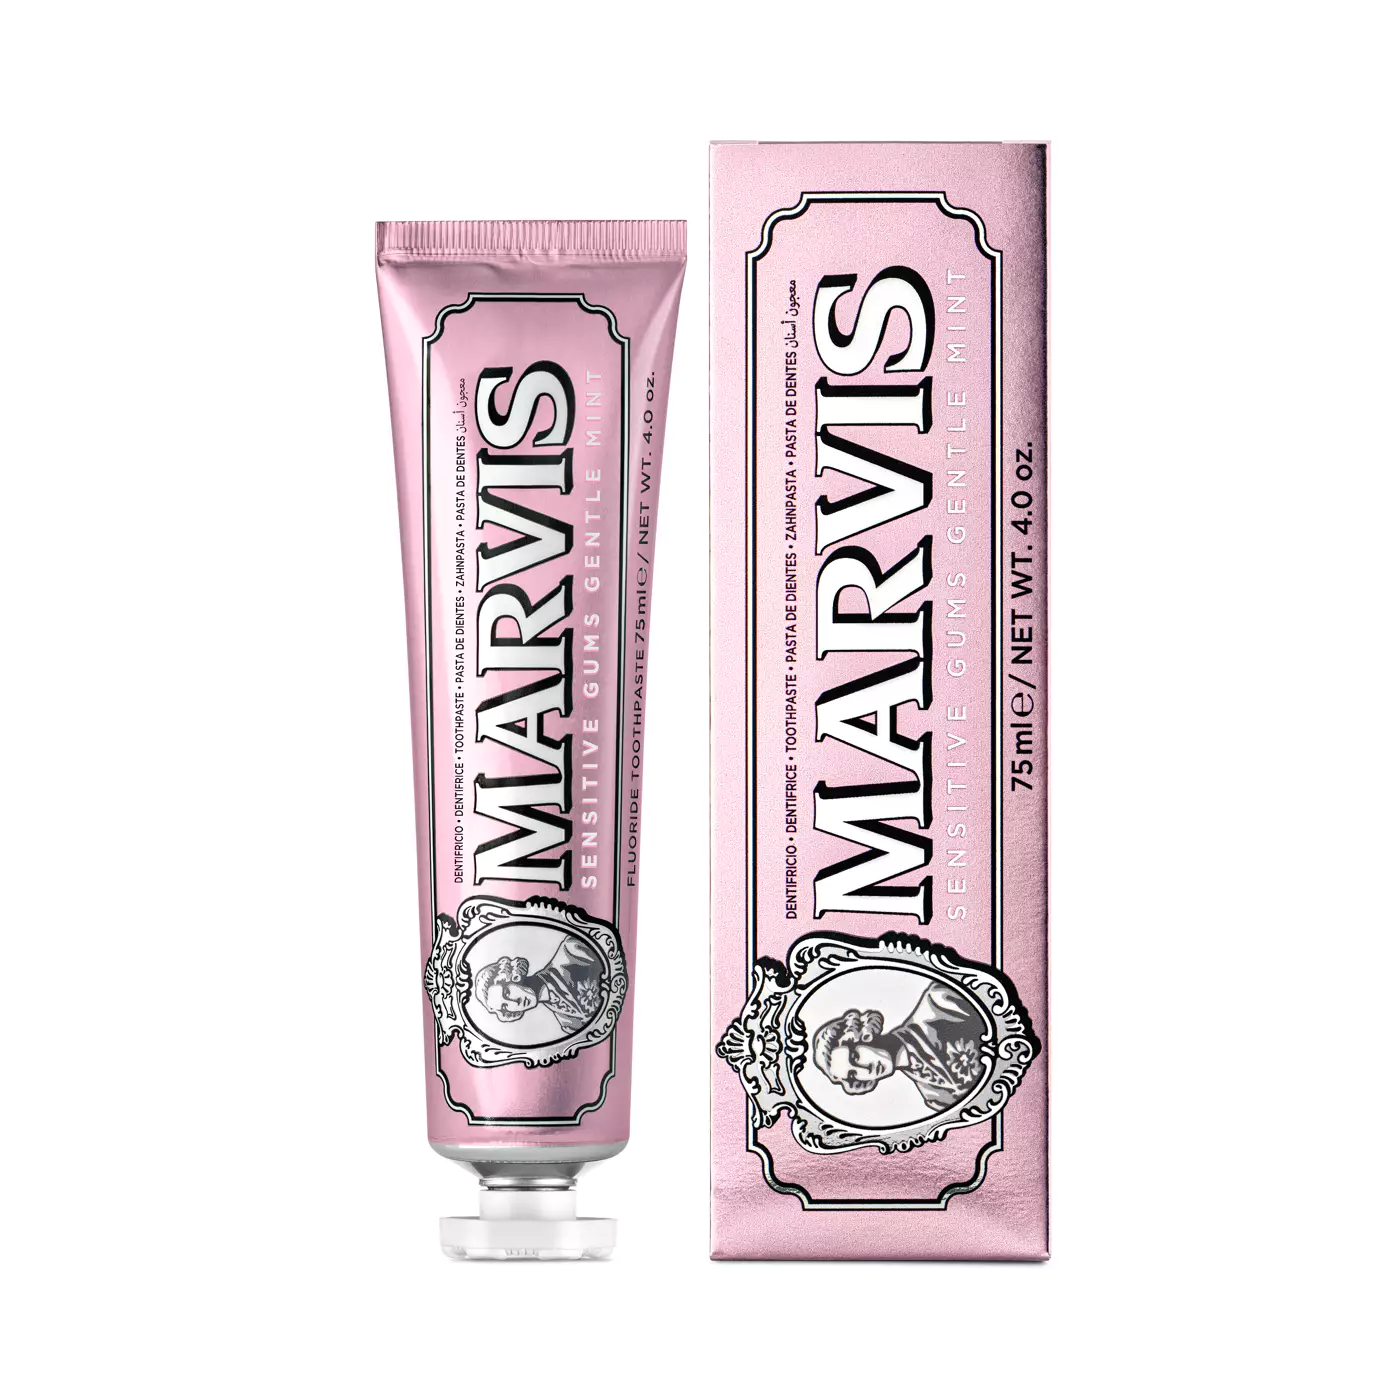 Зубная паста Marvis Sensitive Gums Gentle Mint для чувствительных десен, 75 мл зубная паста xiaomi dr bei prevent mites from caring for teeth and protecting gums